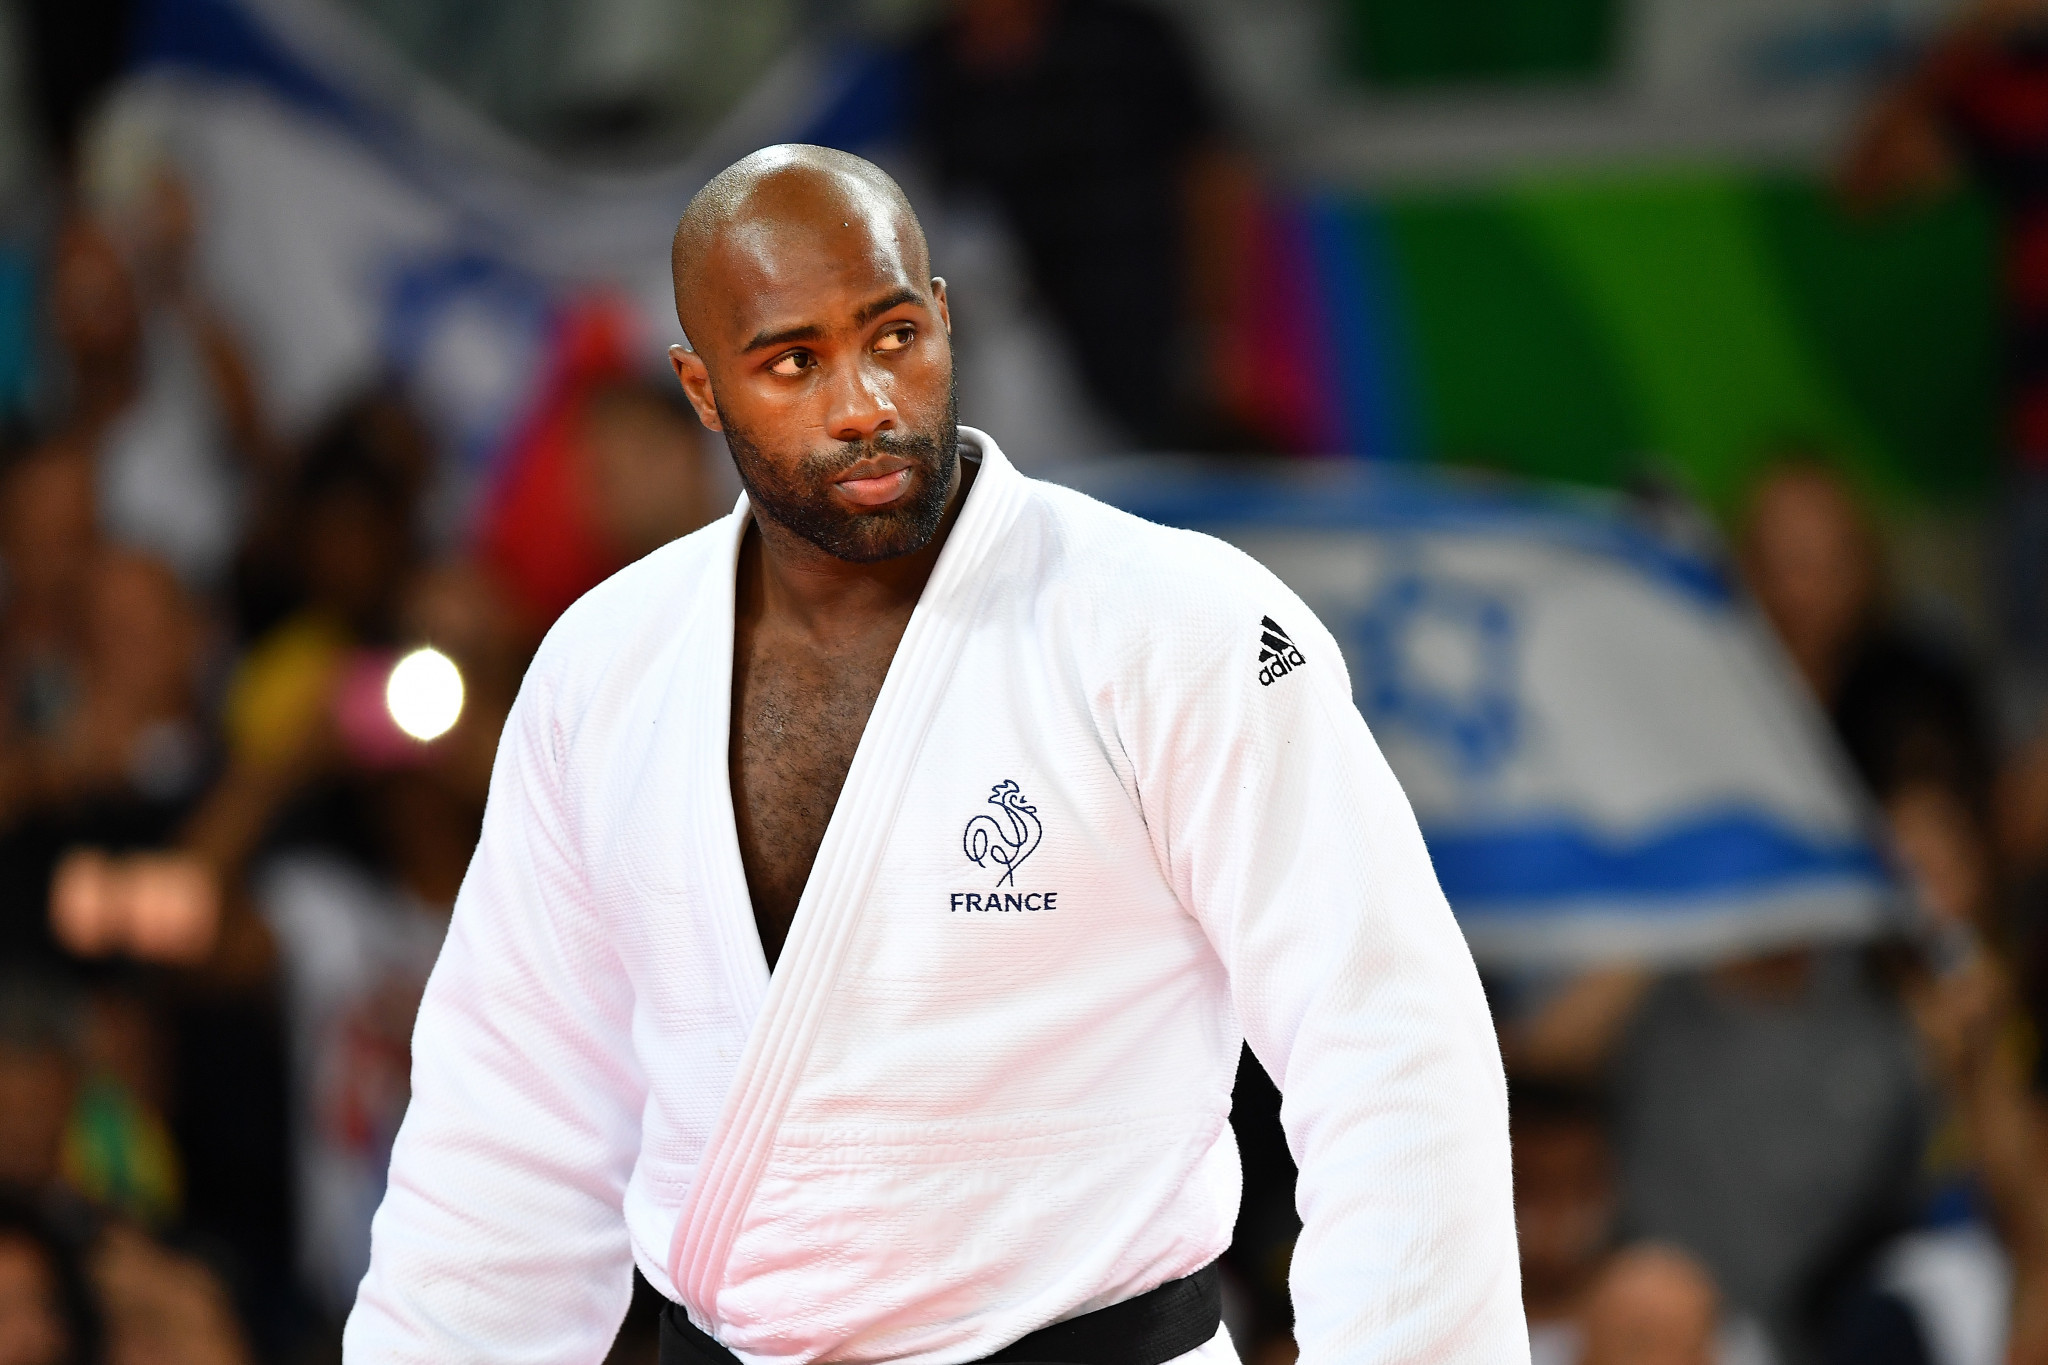 Teddy Riner has pulled out of the Judo World Championships due to injury ©Getty Images